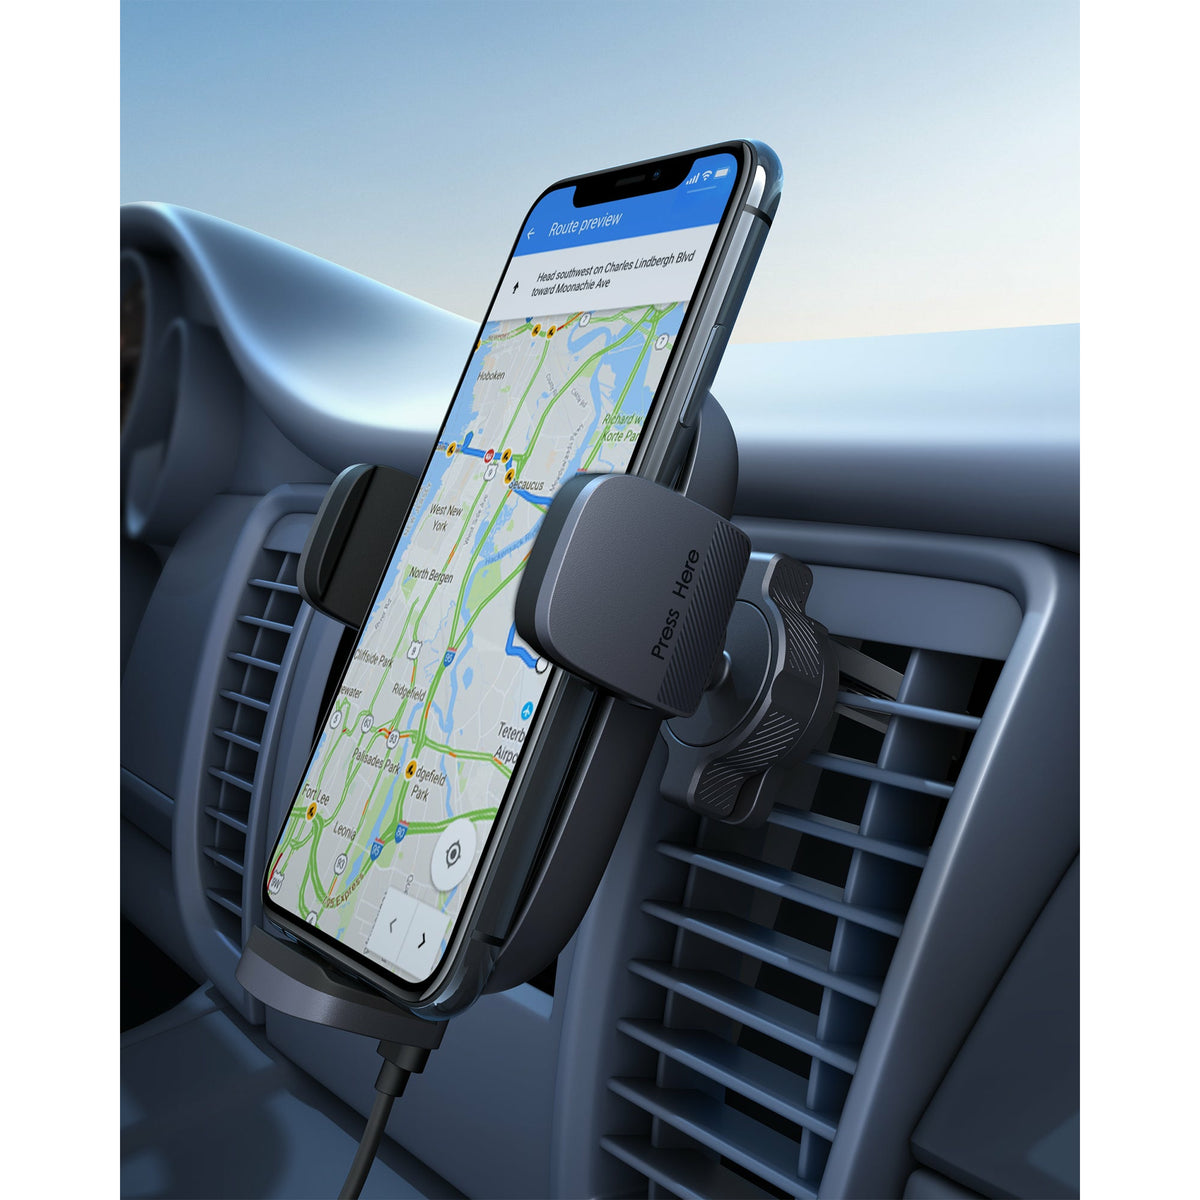 AUKEY Car Magnetic Phone Mount review: The best car phone holder?